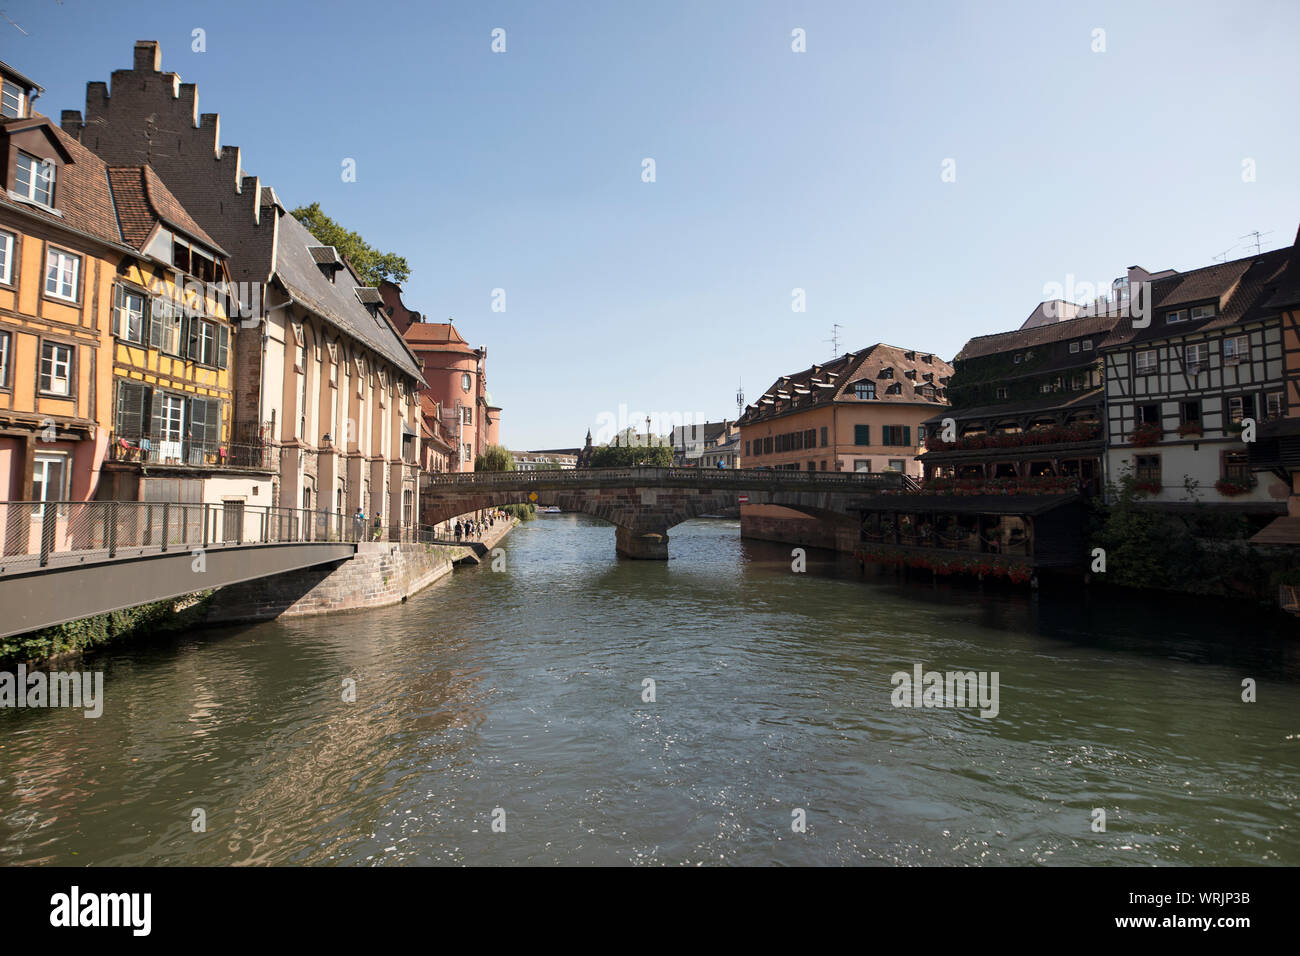 The Pont St Martin crosses the canal amid traditional historic buildings in the Petite France area of Strasbourg, France. Stock Photo